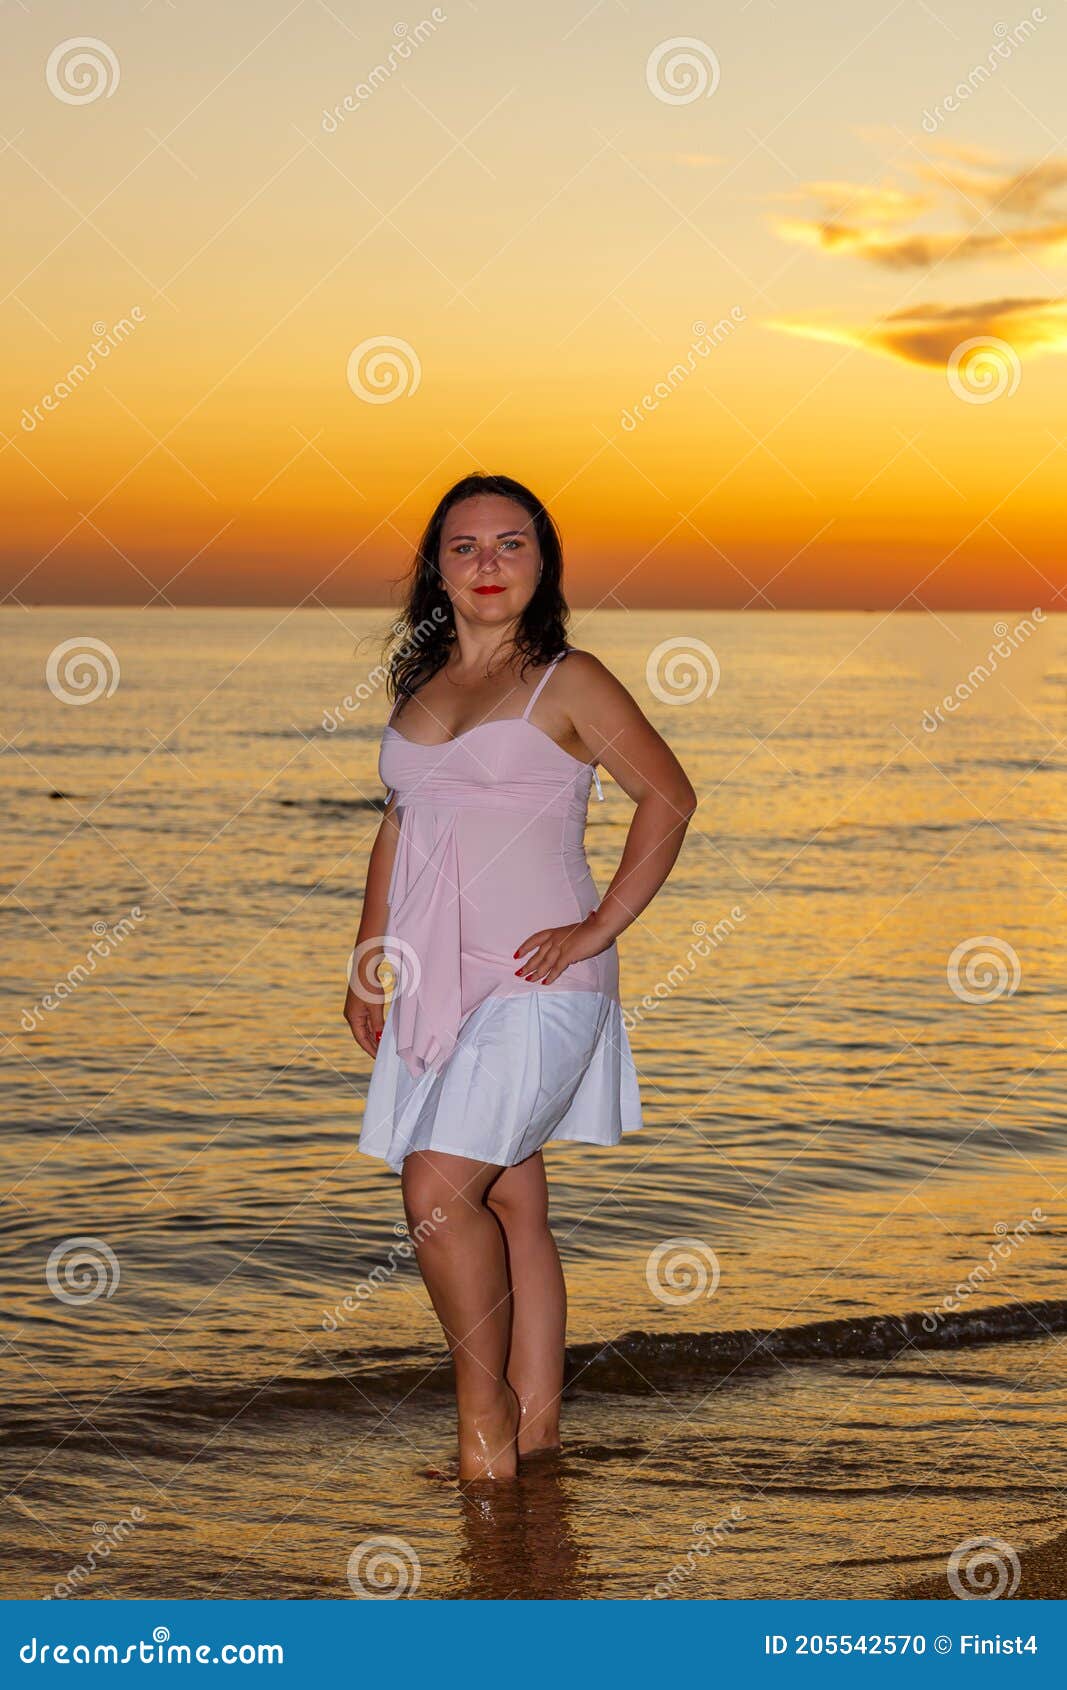 a young woman in a white dress stands on the seashore at sunset.